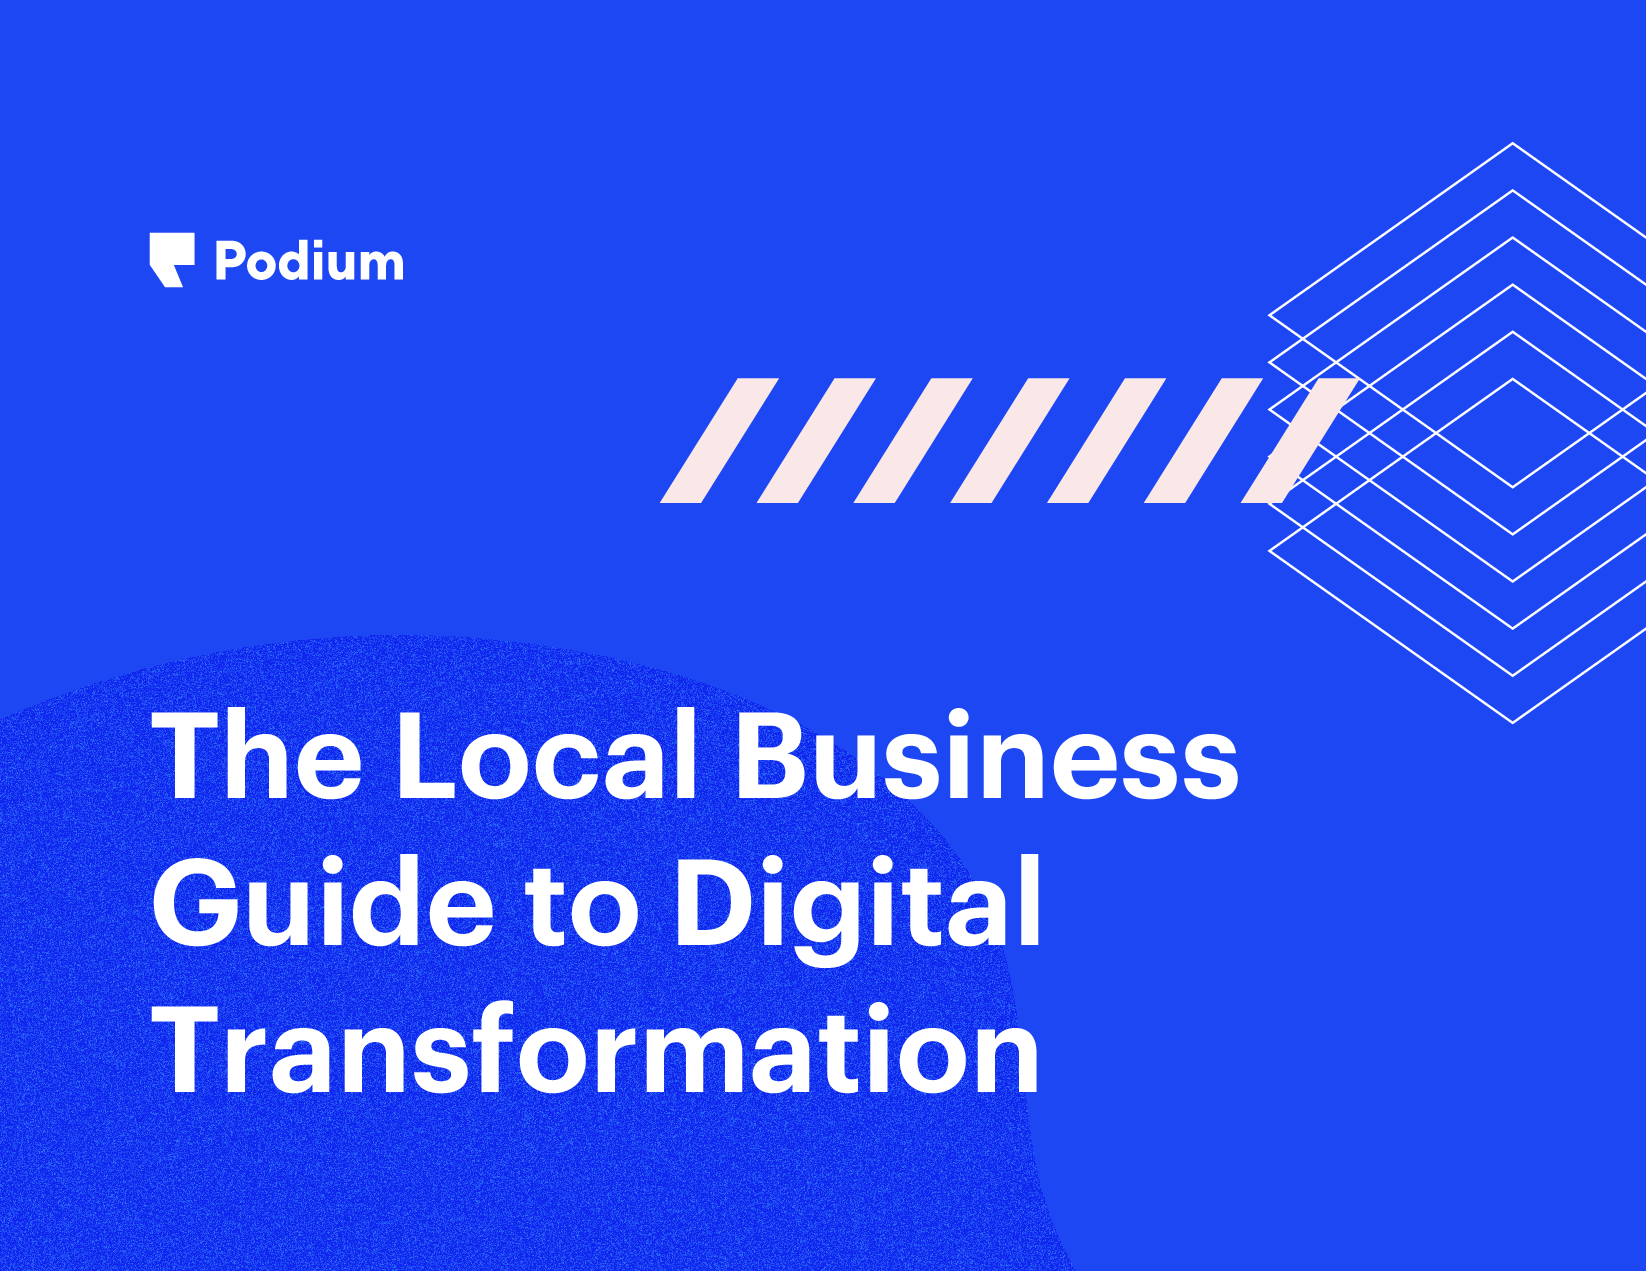 The Local Business Guide to Digital Transformation